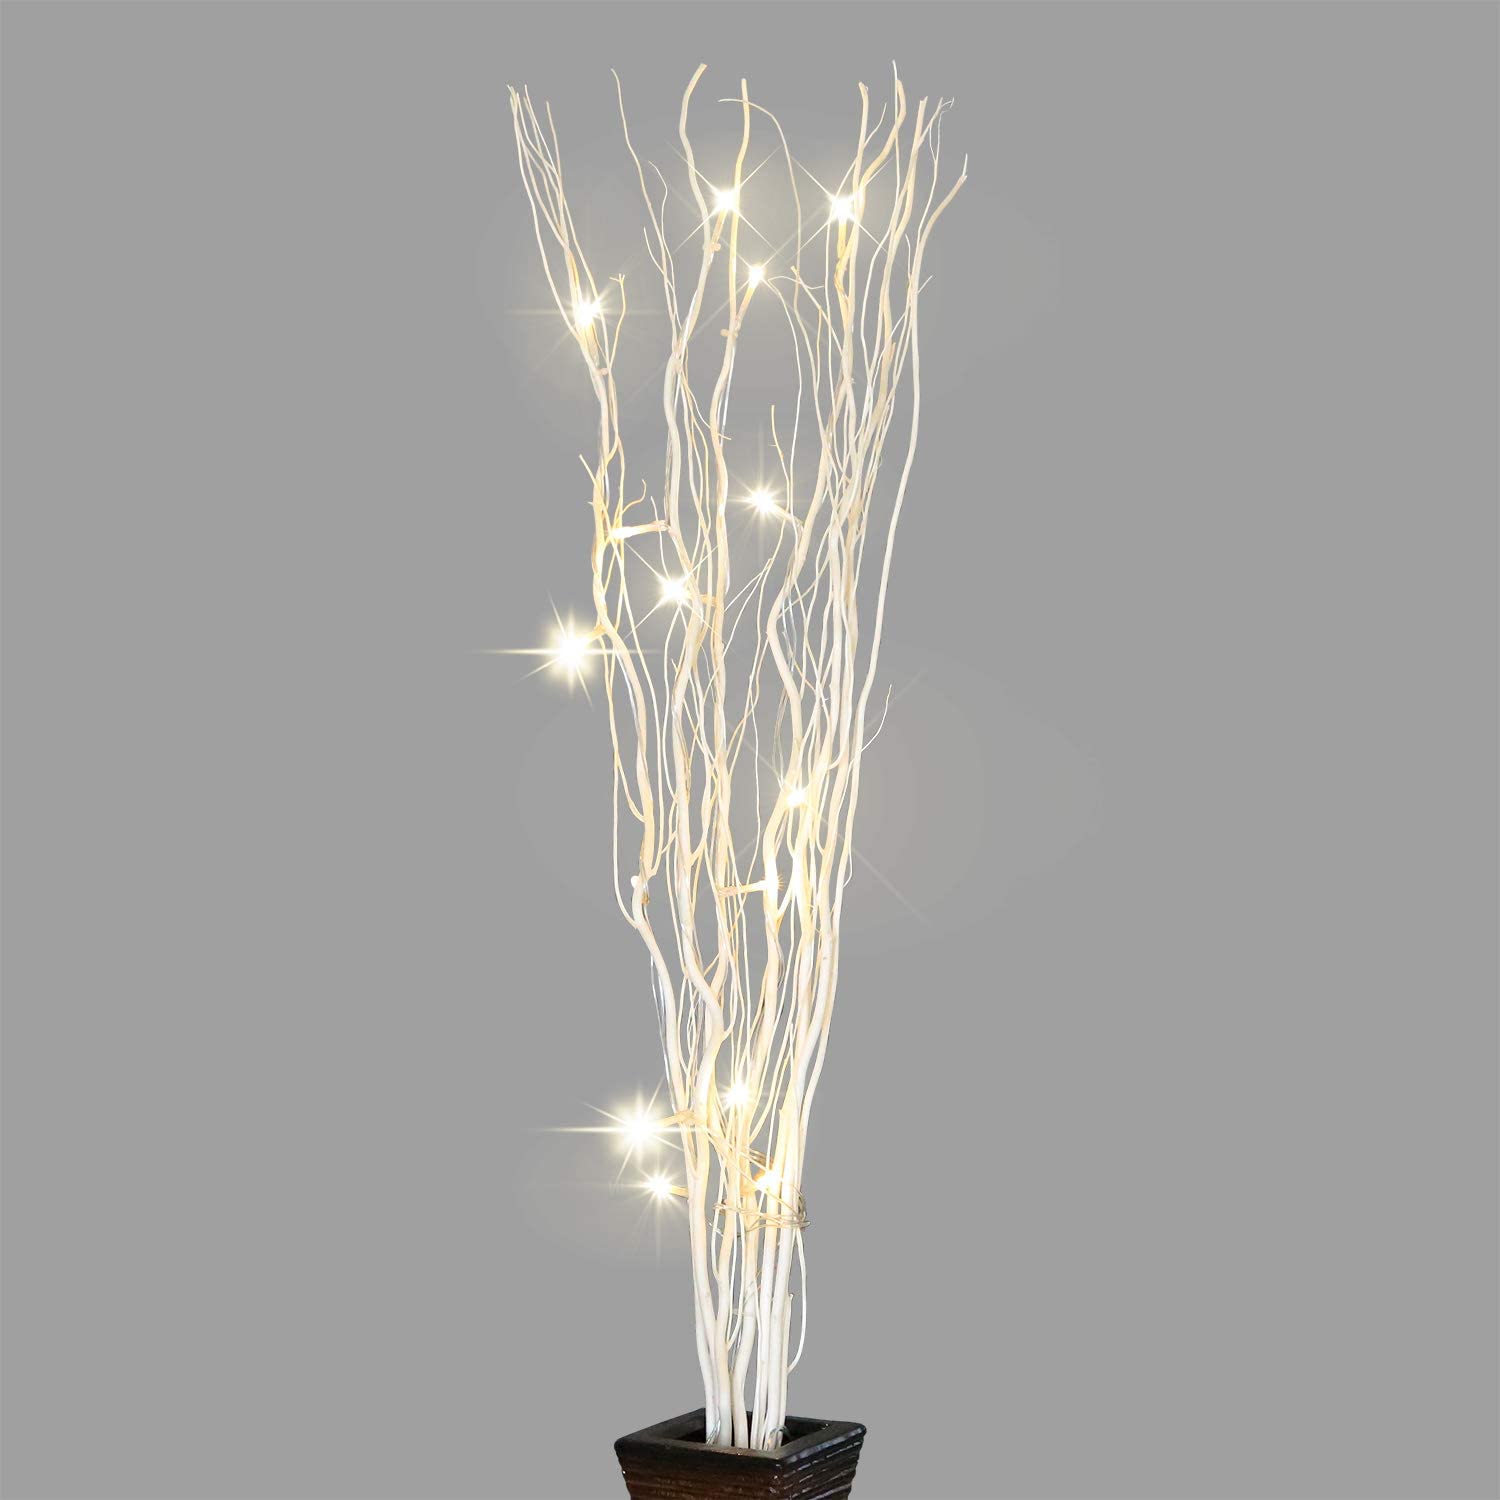 36IN Lighted Natural Branches, 16 LED Lights, Battery Operated and Optional USB Plug-in